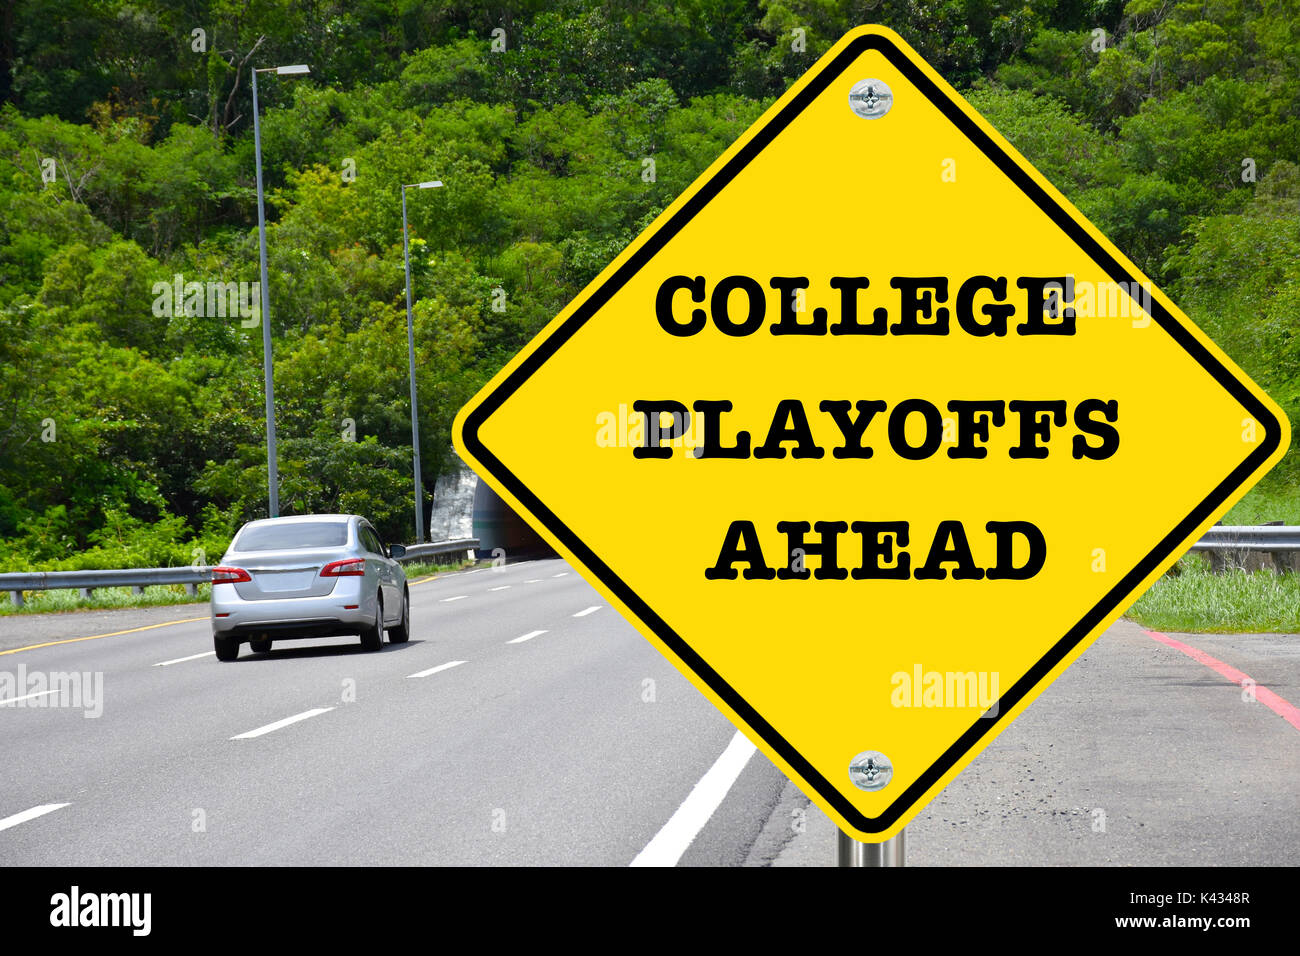 College playoffs ahead, yellow warning road sign Stock Photo